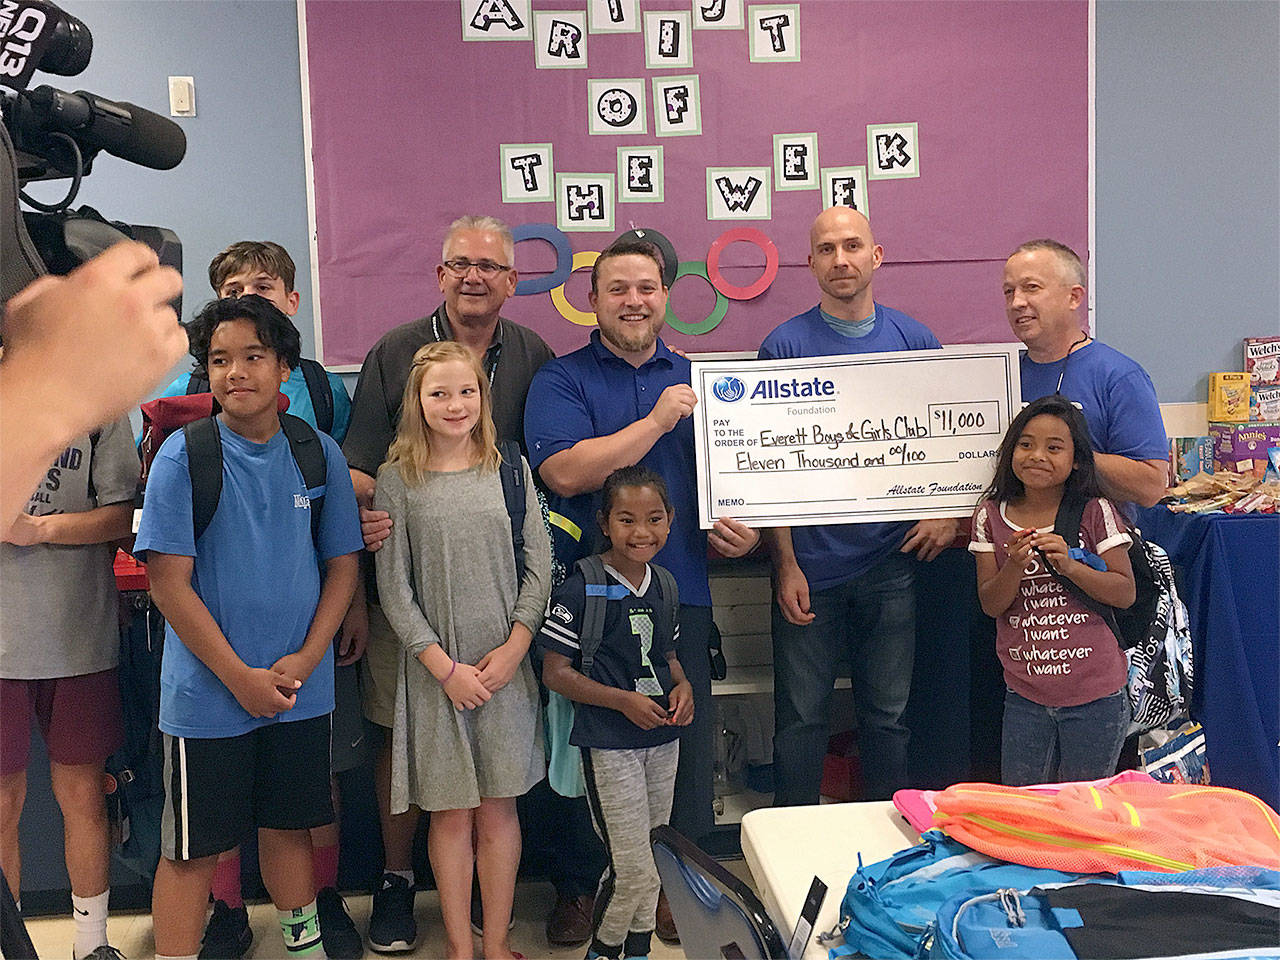 The Allstate Foundation and the Allstate Agency Force gave away 250 free backpacks, 30 cases of snacks and $11,000 to the Everett Boys & Girls Club on Aug. 31, 2017. (Contributed photo)